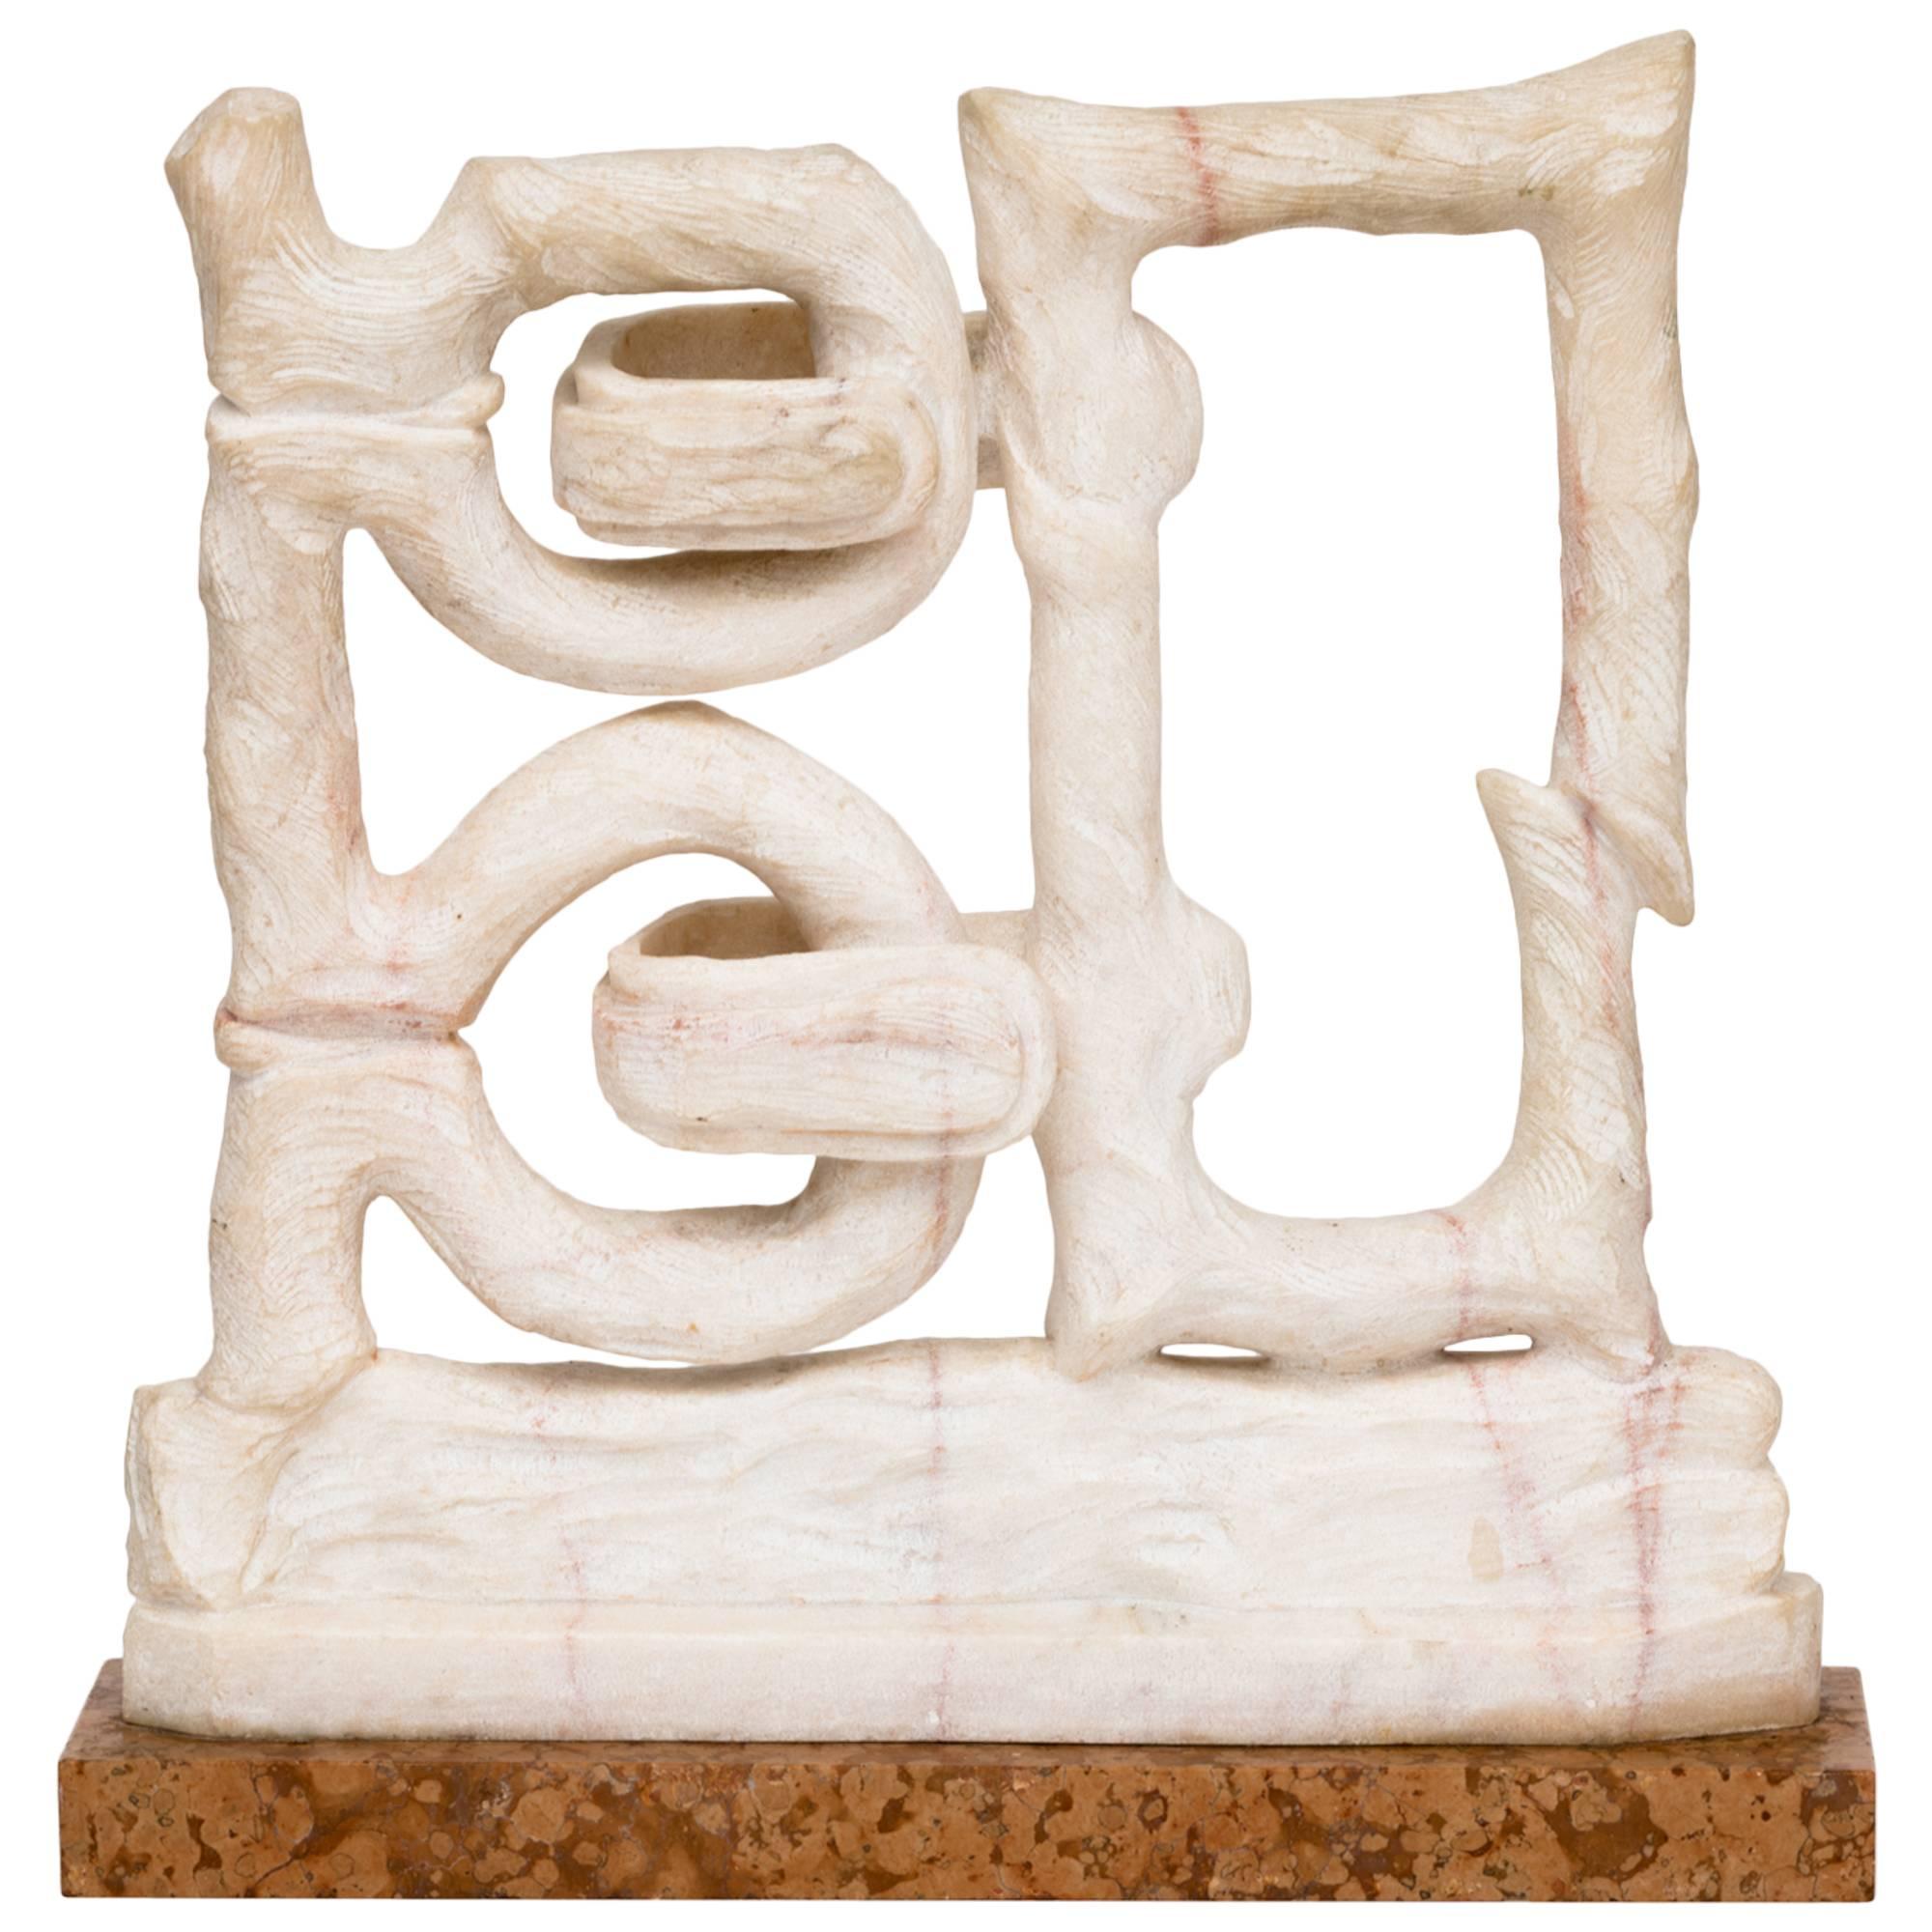 Monumental "Wedlock" Marble Sculpture by Catchi, circa 1979